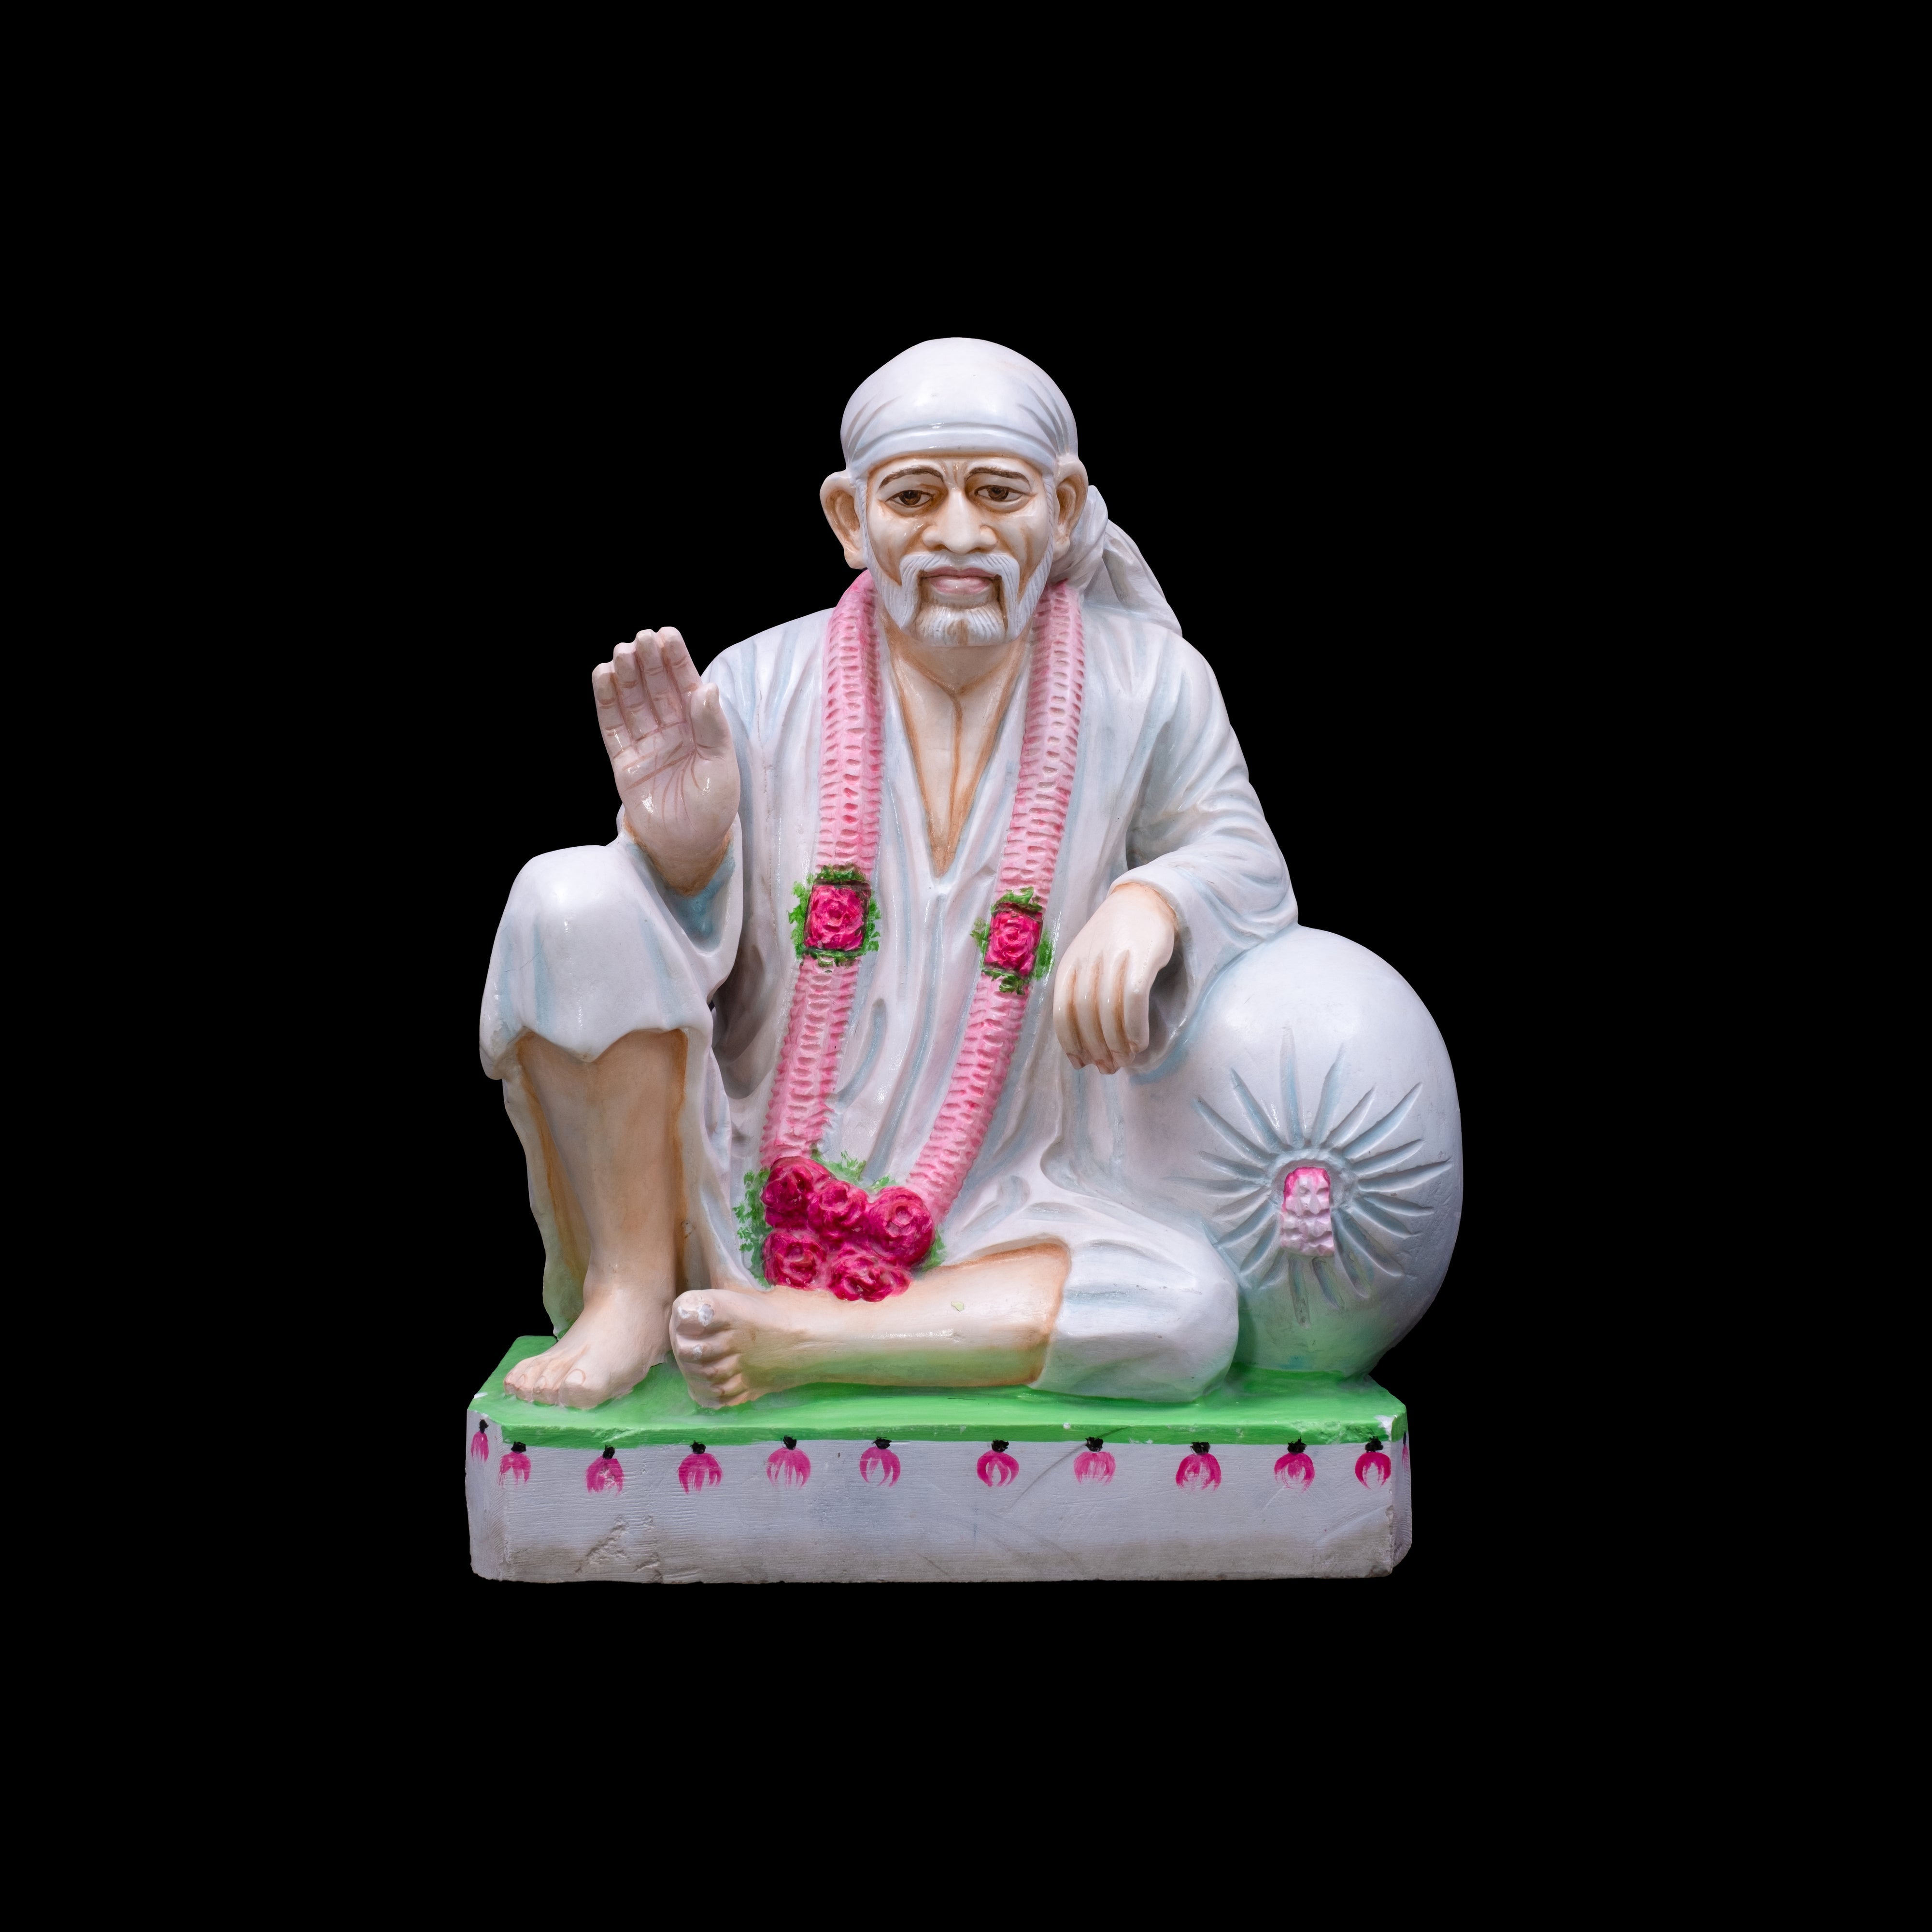 Shirdi Sai Baba - An amazing carving of the Saint in ash wood 24